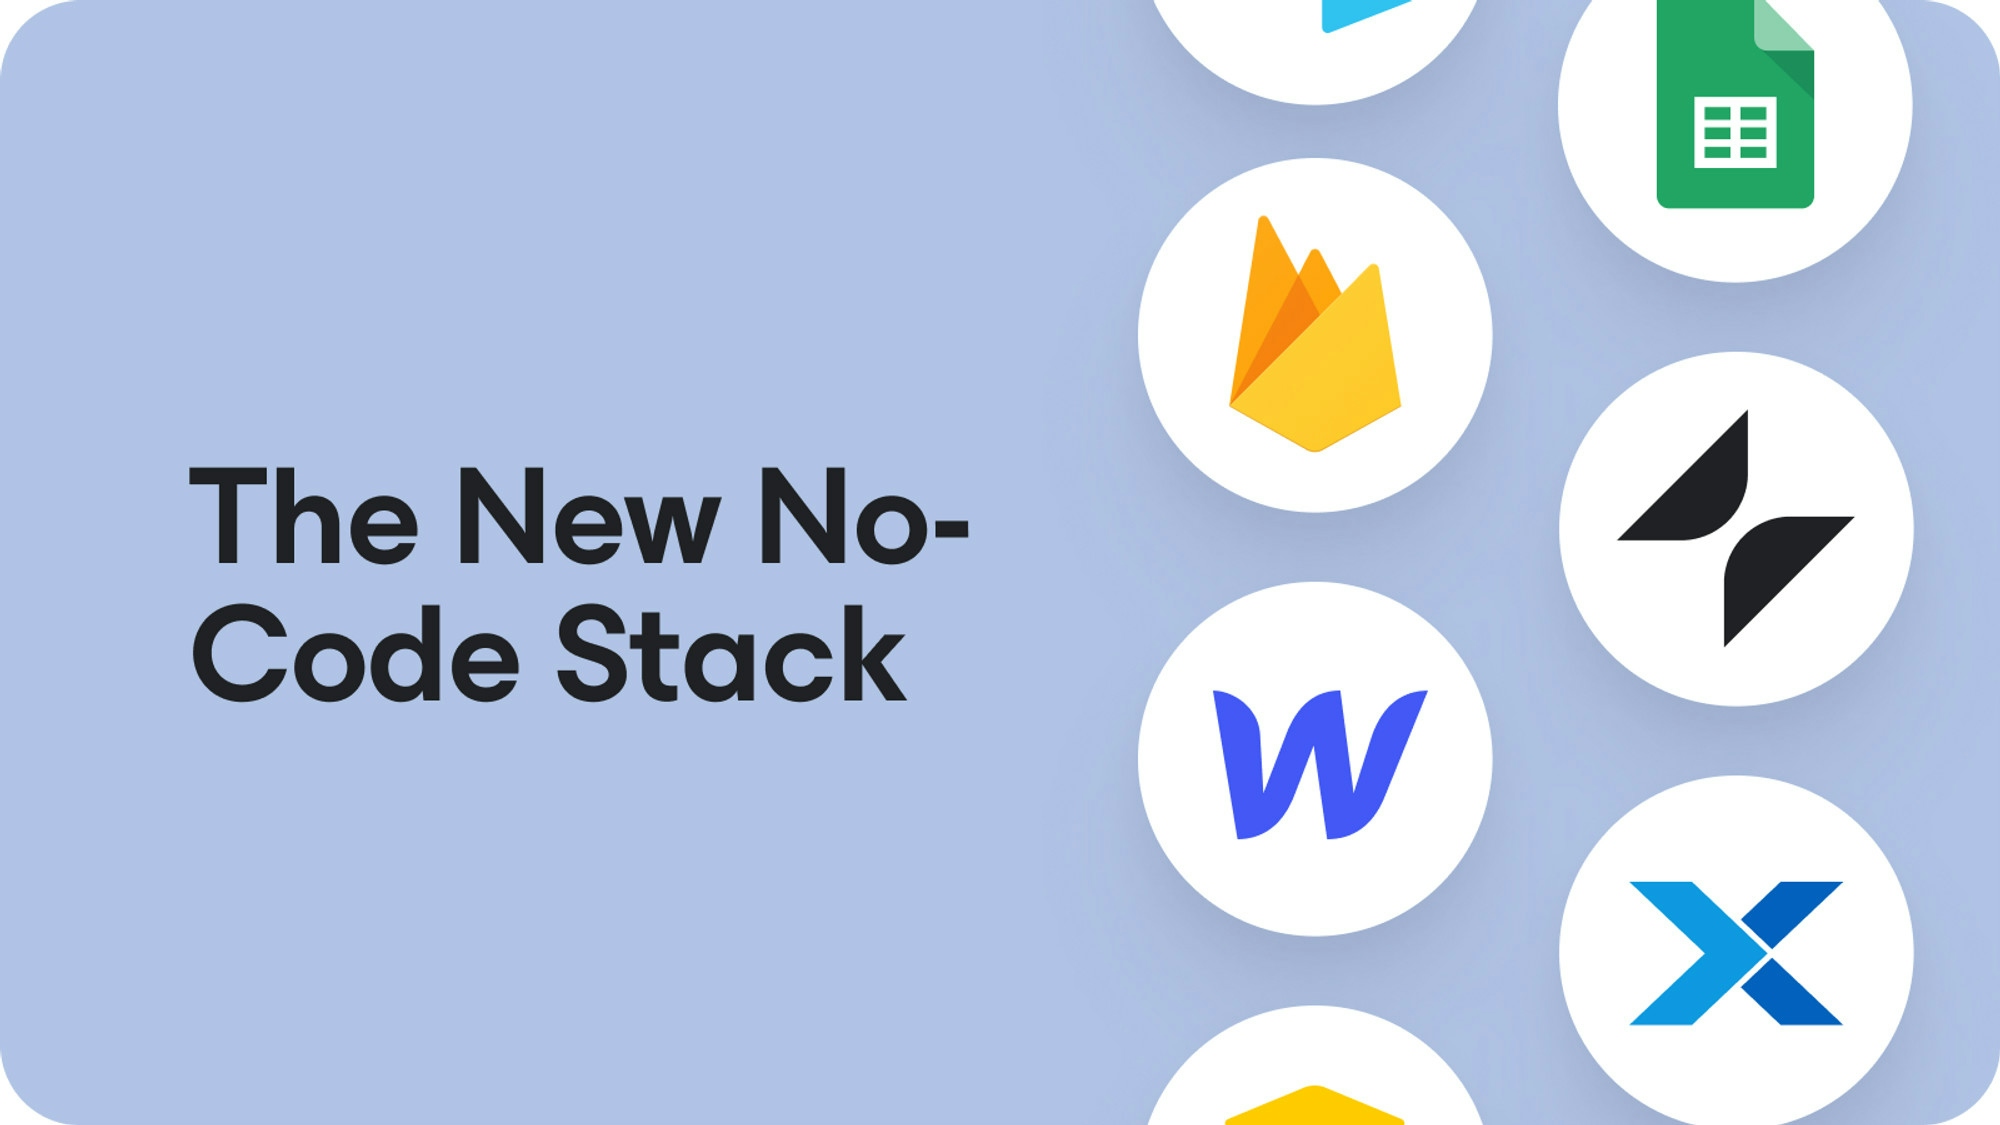 7 Essential Tools for Your No-Code Stack